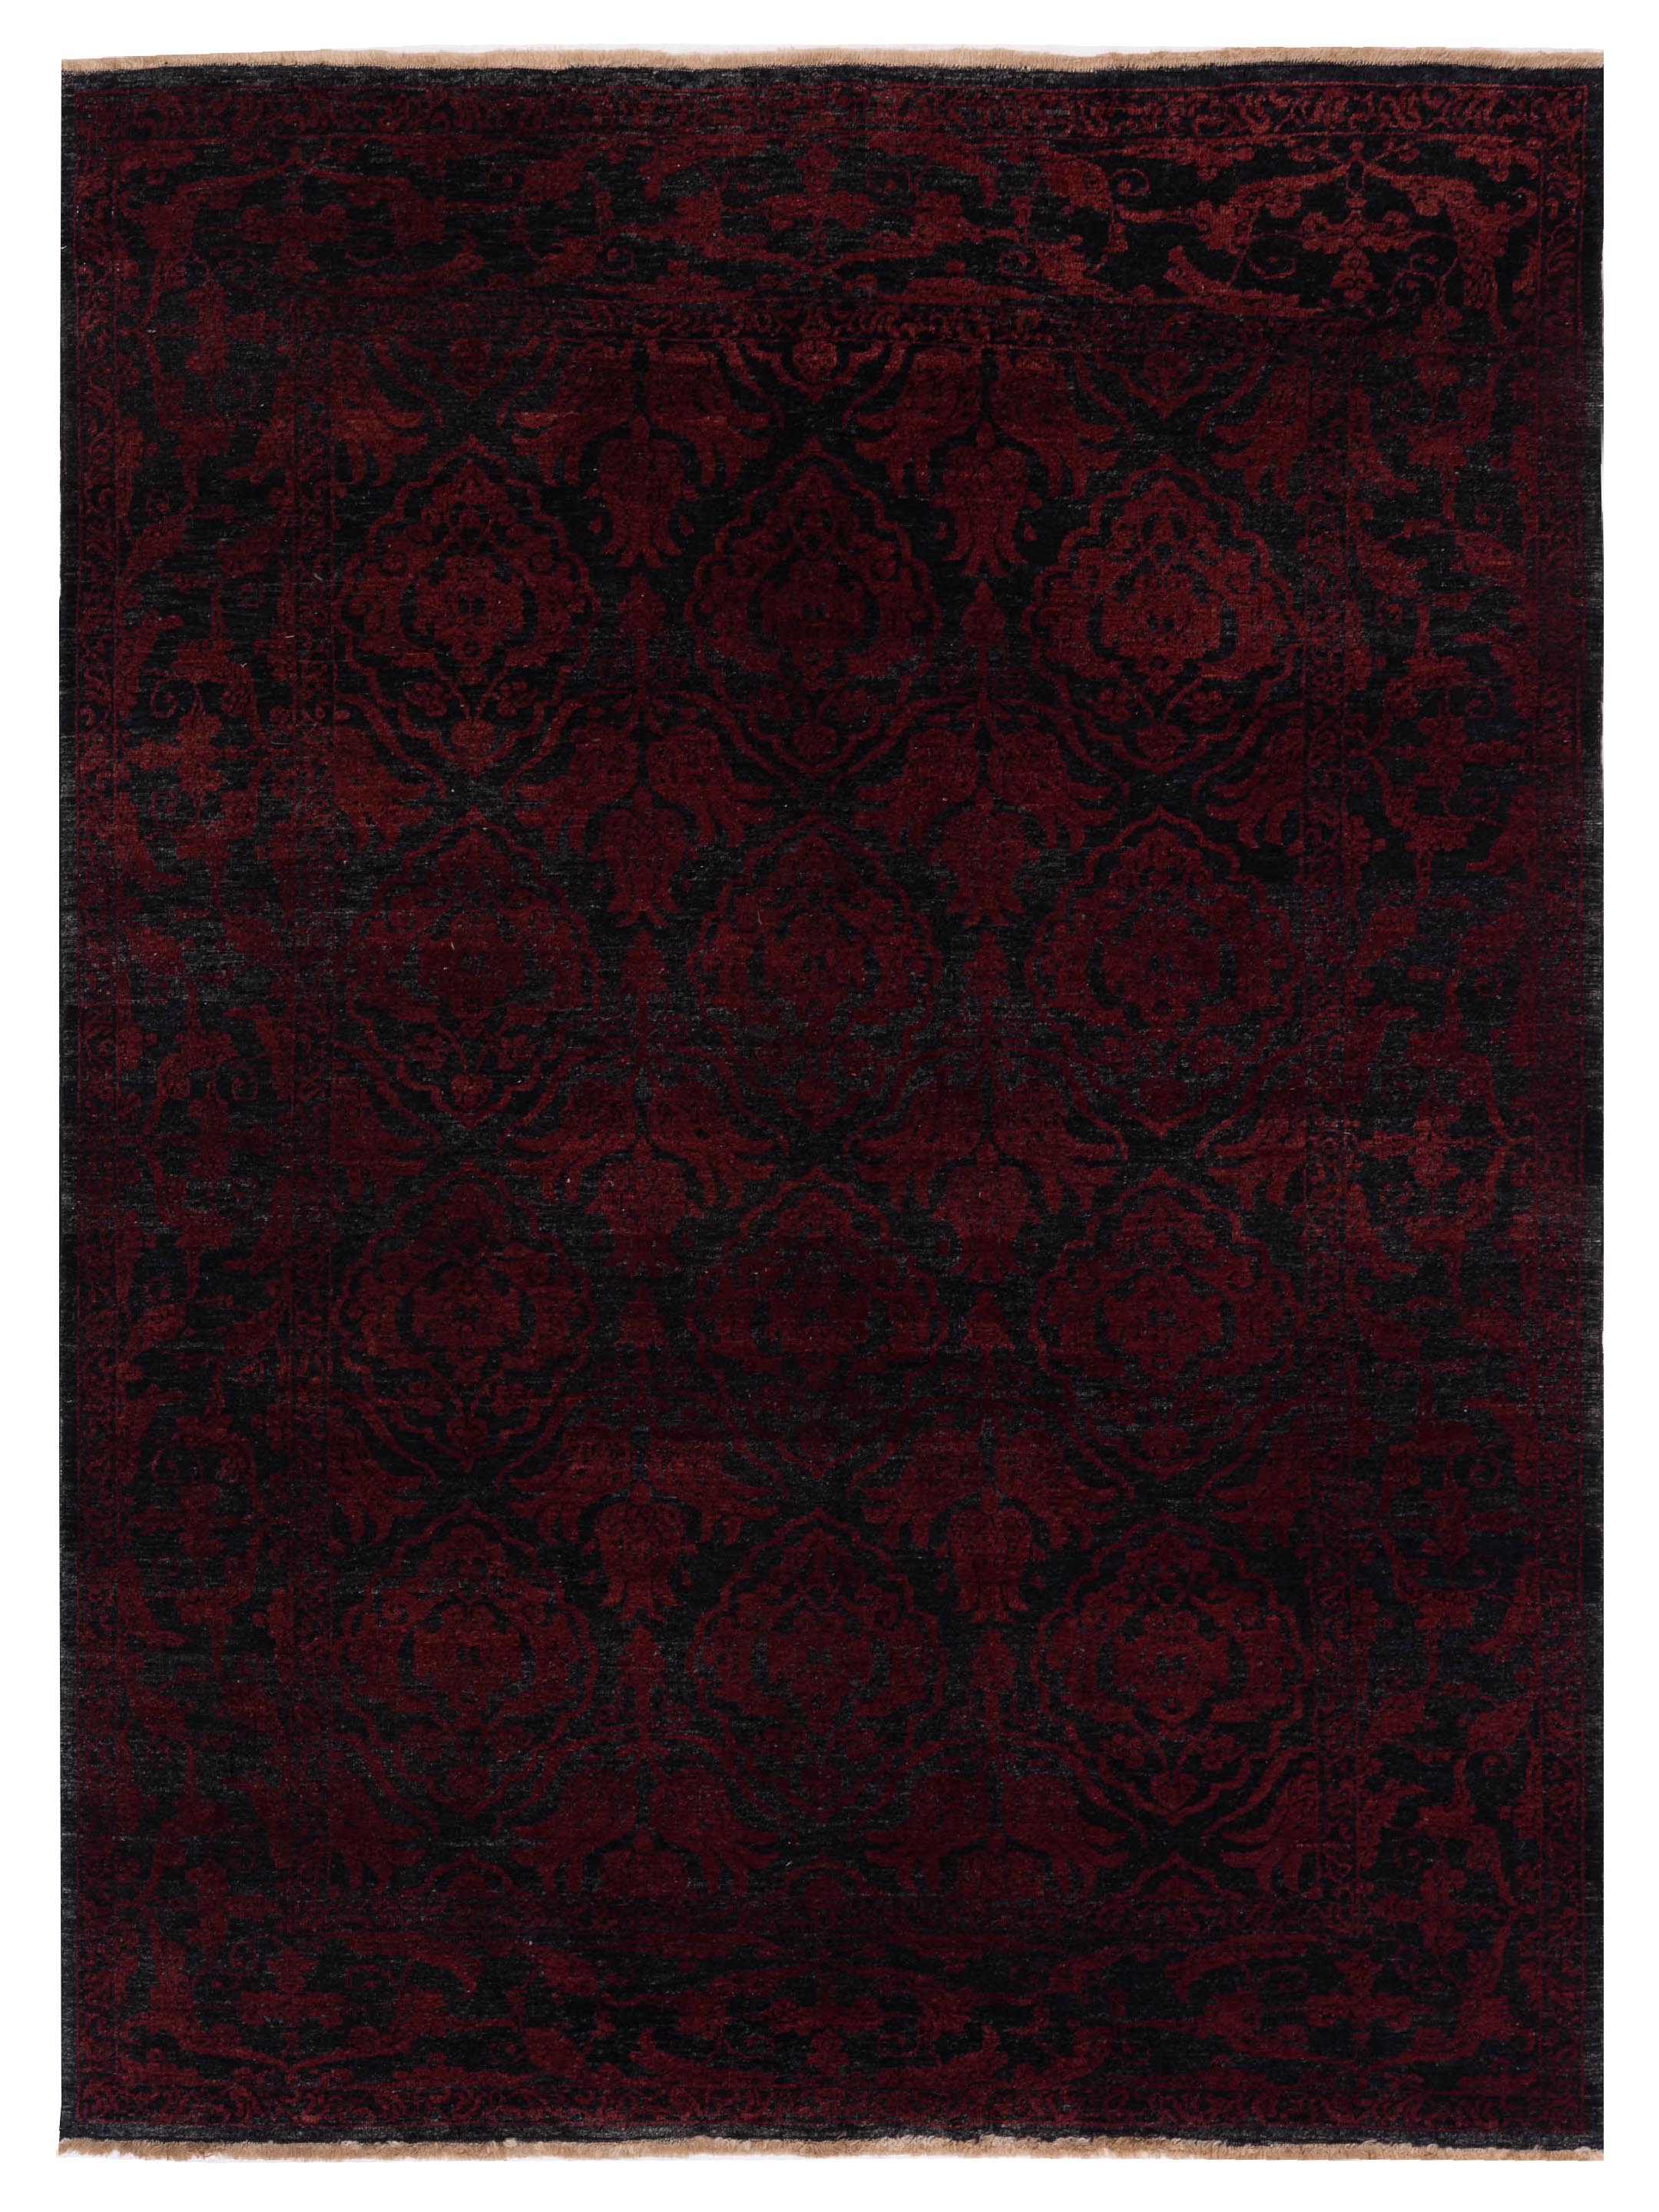 Transitional Charcoal Red Gothic Area Rug	